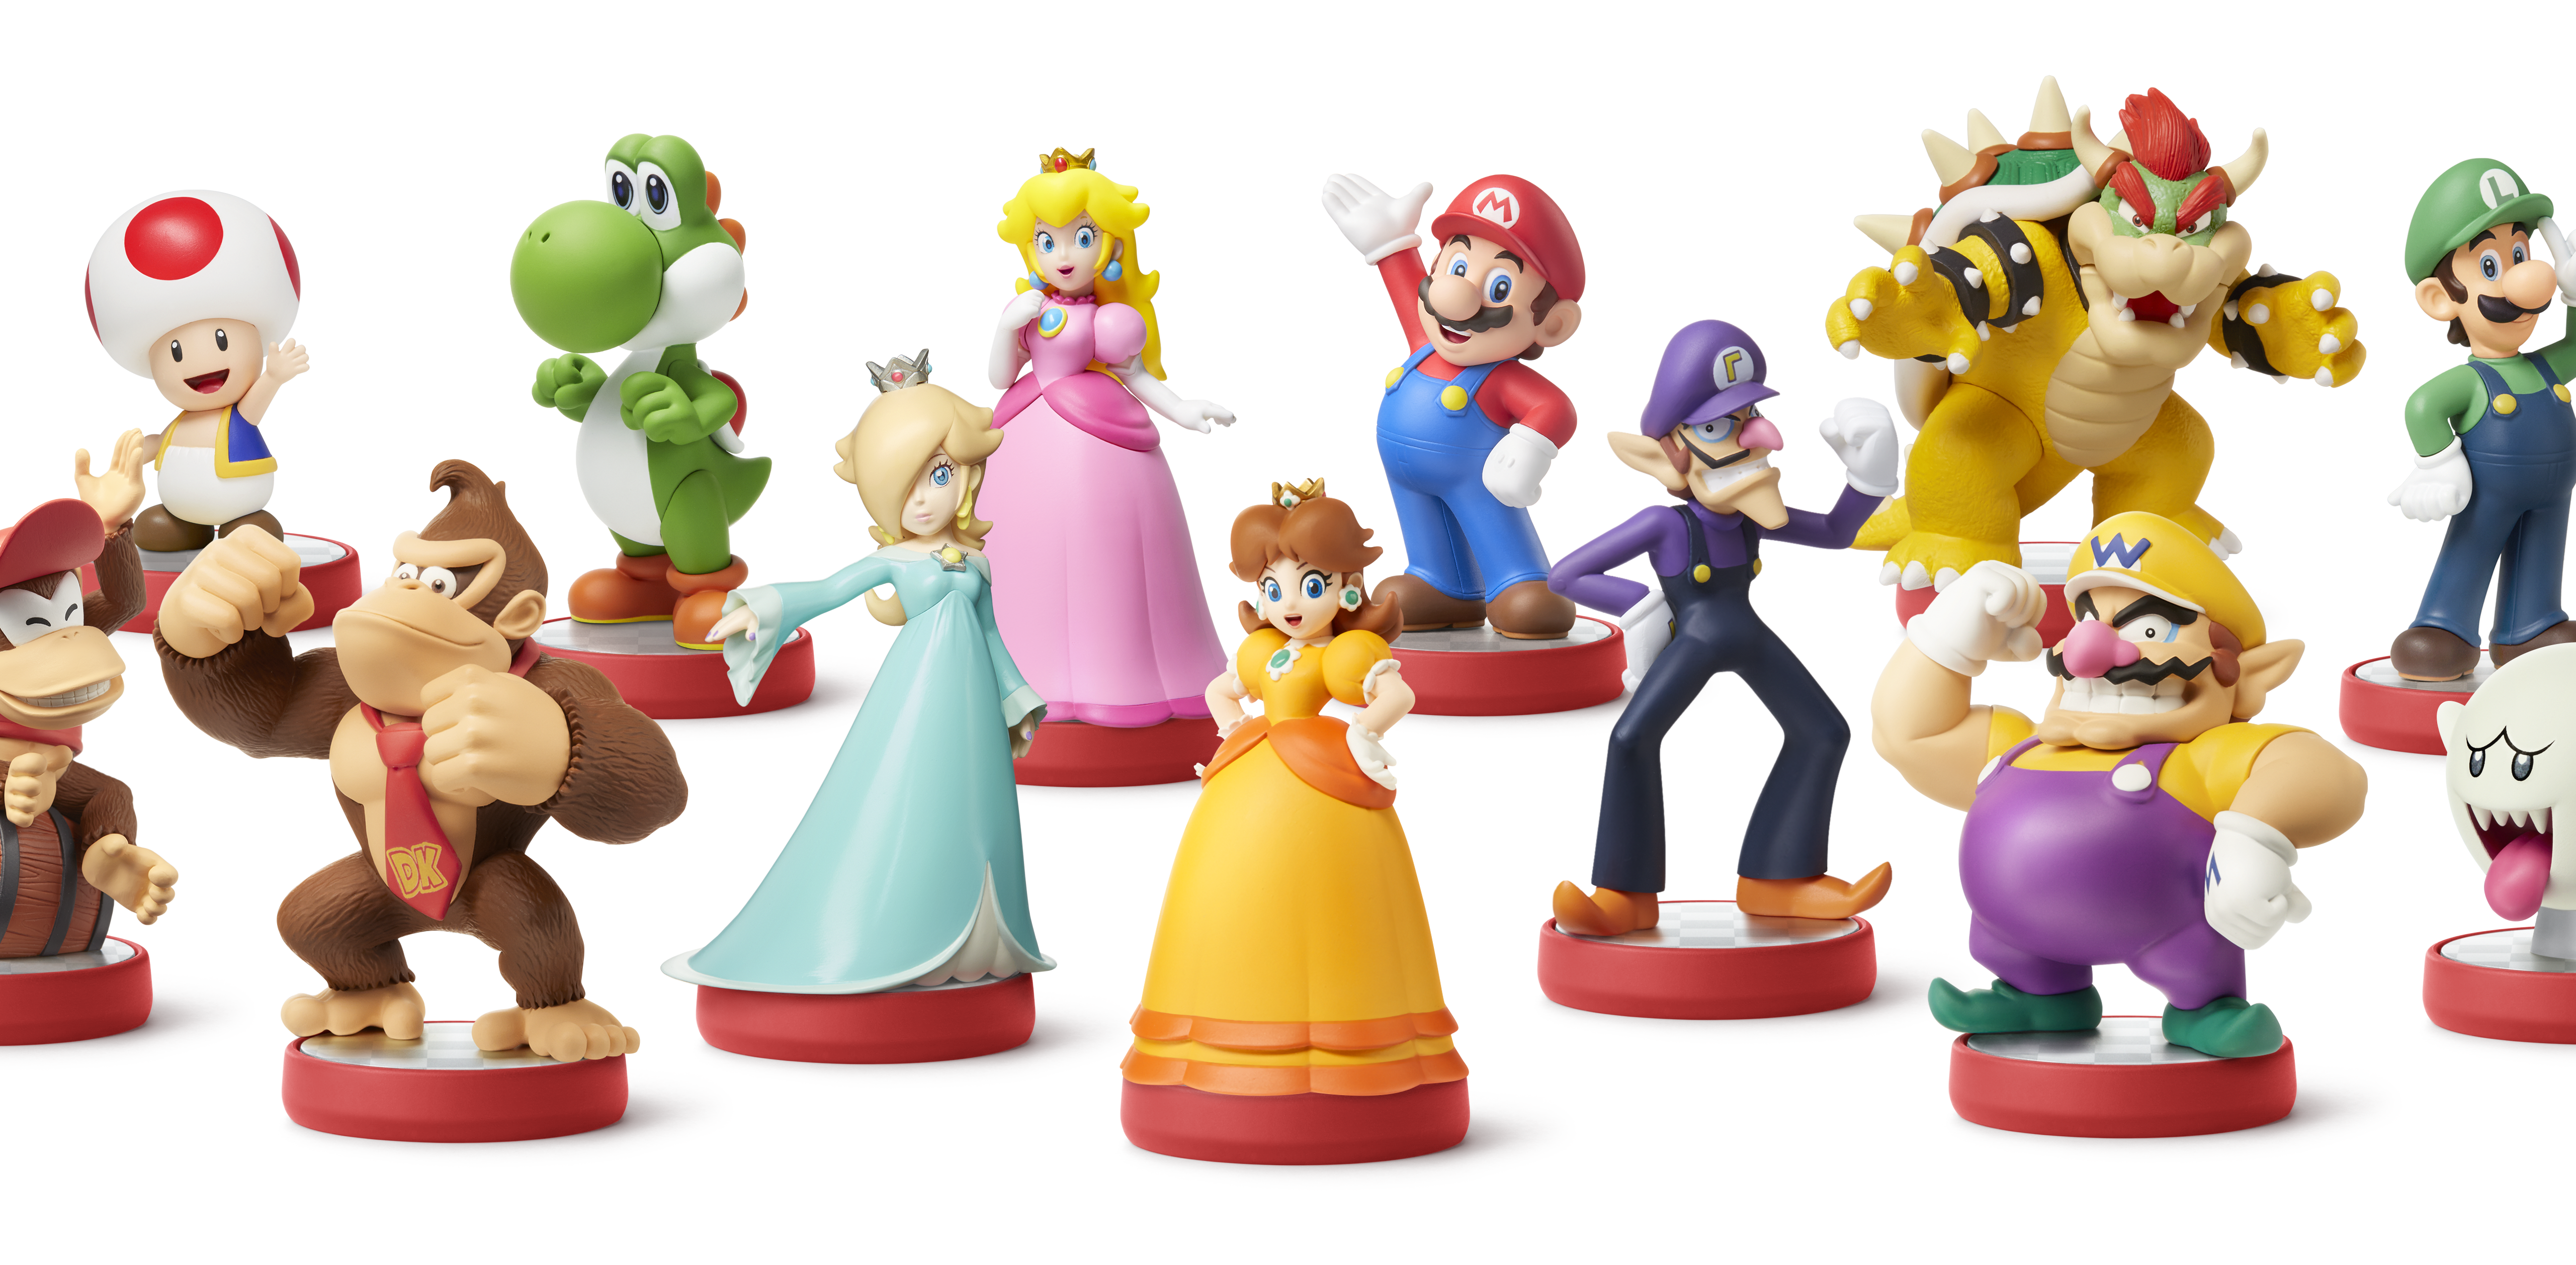 amiibos for sale